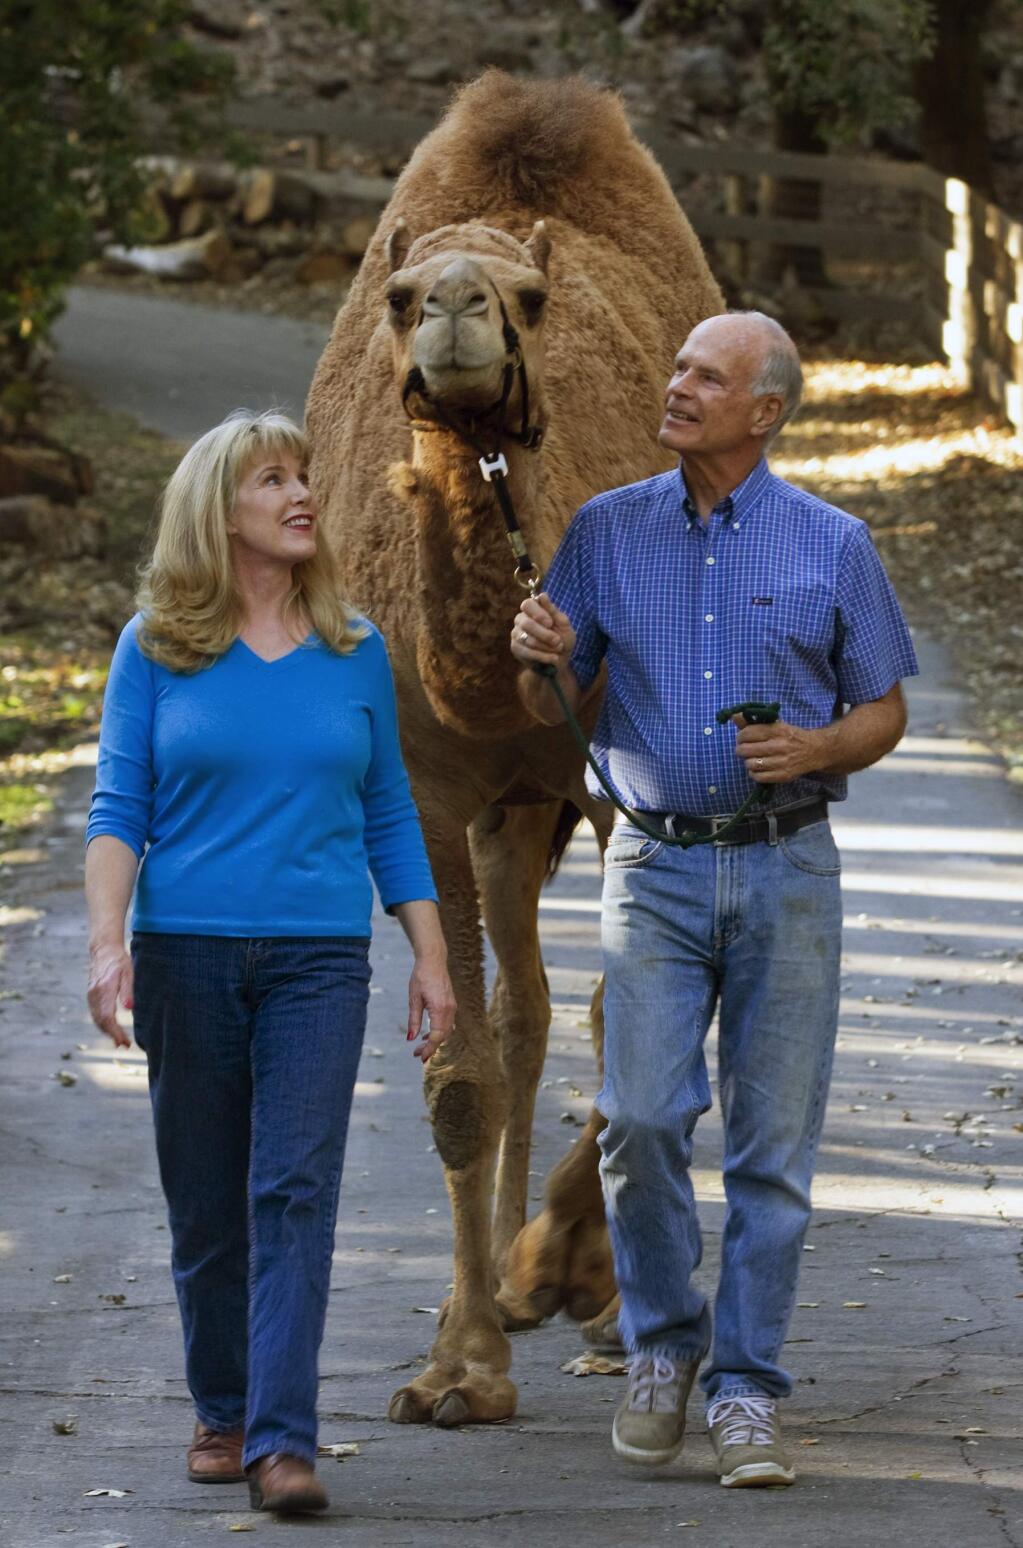 Robin and Rob Lyon take Hump-Free for a walk at the Lyon Ranch. Just over a month ago, the sweet, gentle camel known as Hump-Free died suddenly after an unidentified person fed him a toxic plant, most likely oleander or yew. Hump-free, who lived at the Lyon Ranch for fourteen years, became one of their best-known and loved “therapy animals.” He was highly visible at local events and parades and anywhere the Lyons took their extensive menagerie to bring a little joy into the lives of those whose mobility, whether through illness or age, wouldn't allow them to travel. (File photos by Robbi Pengelly/Index-Tribune)